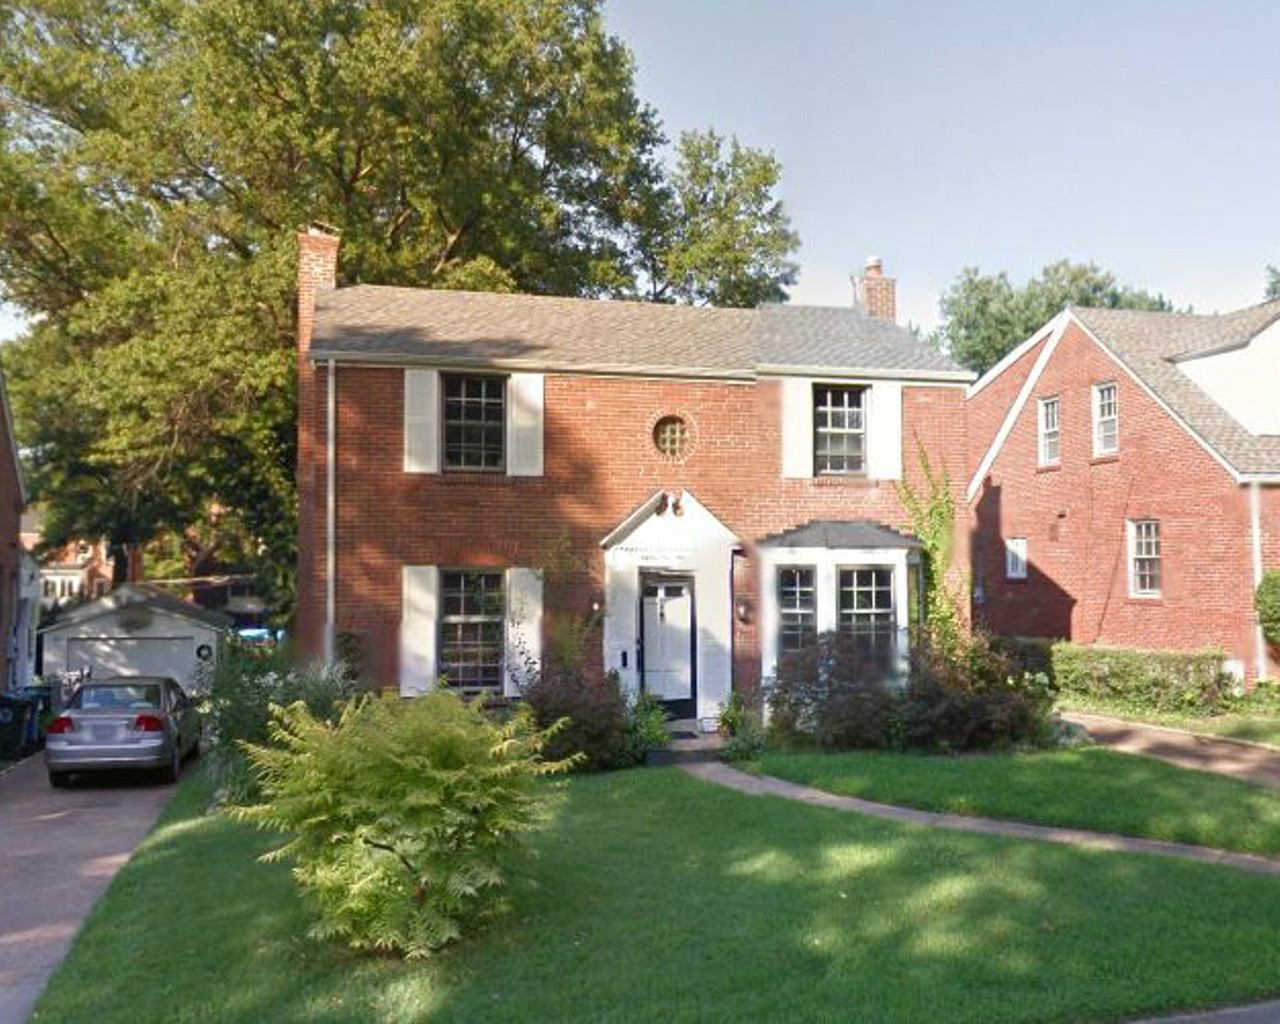 "Here's where The Exorcist exorcism went down."
8435 Roanoke Dr.
"Remember The Exorcist? This was the real house where some kid got possessed, and the priests at Saint Louis University really did expel the demons."
Photo courtesy of Google Maps